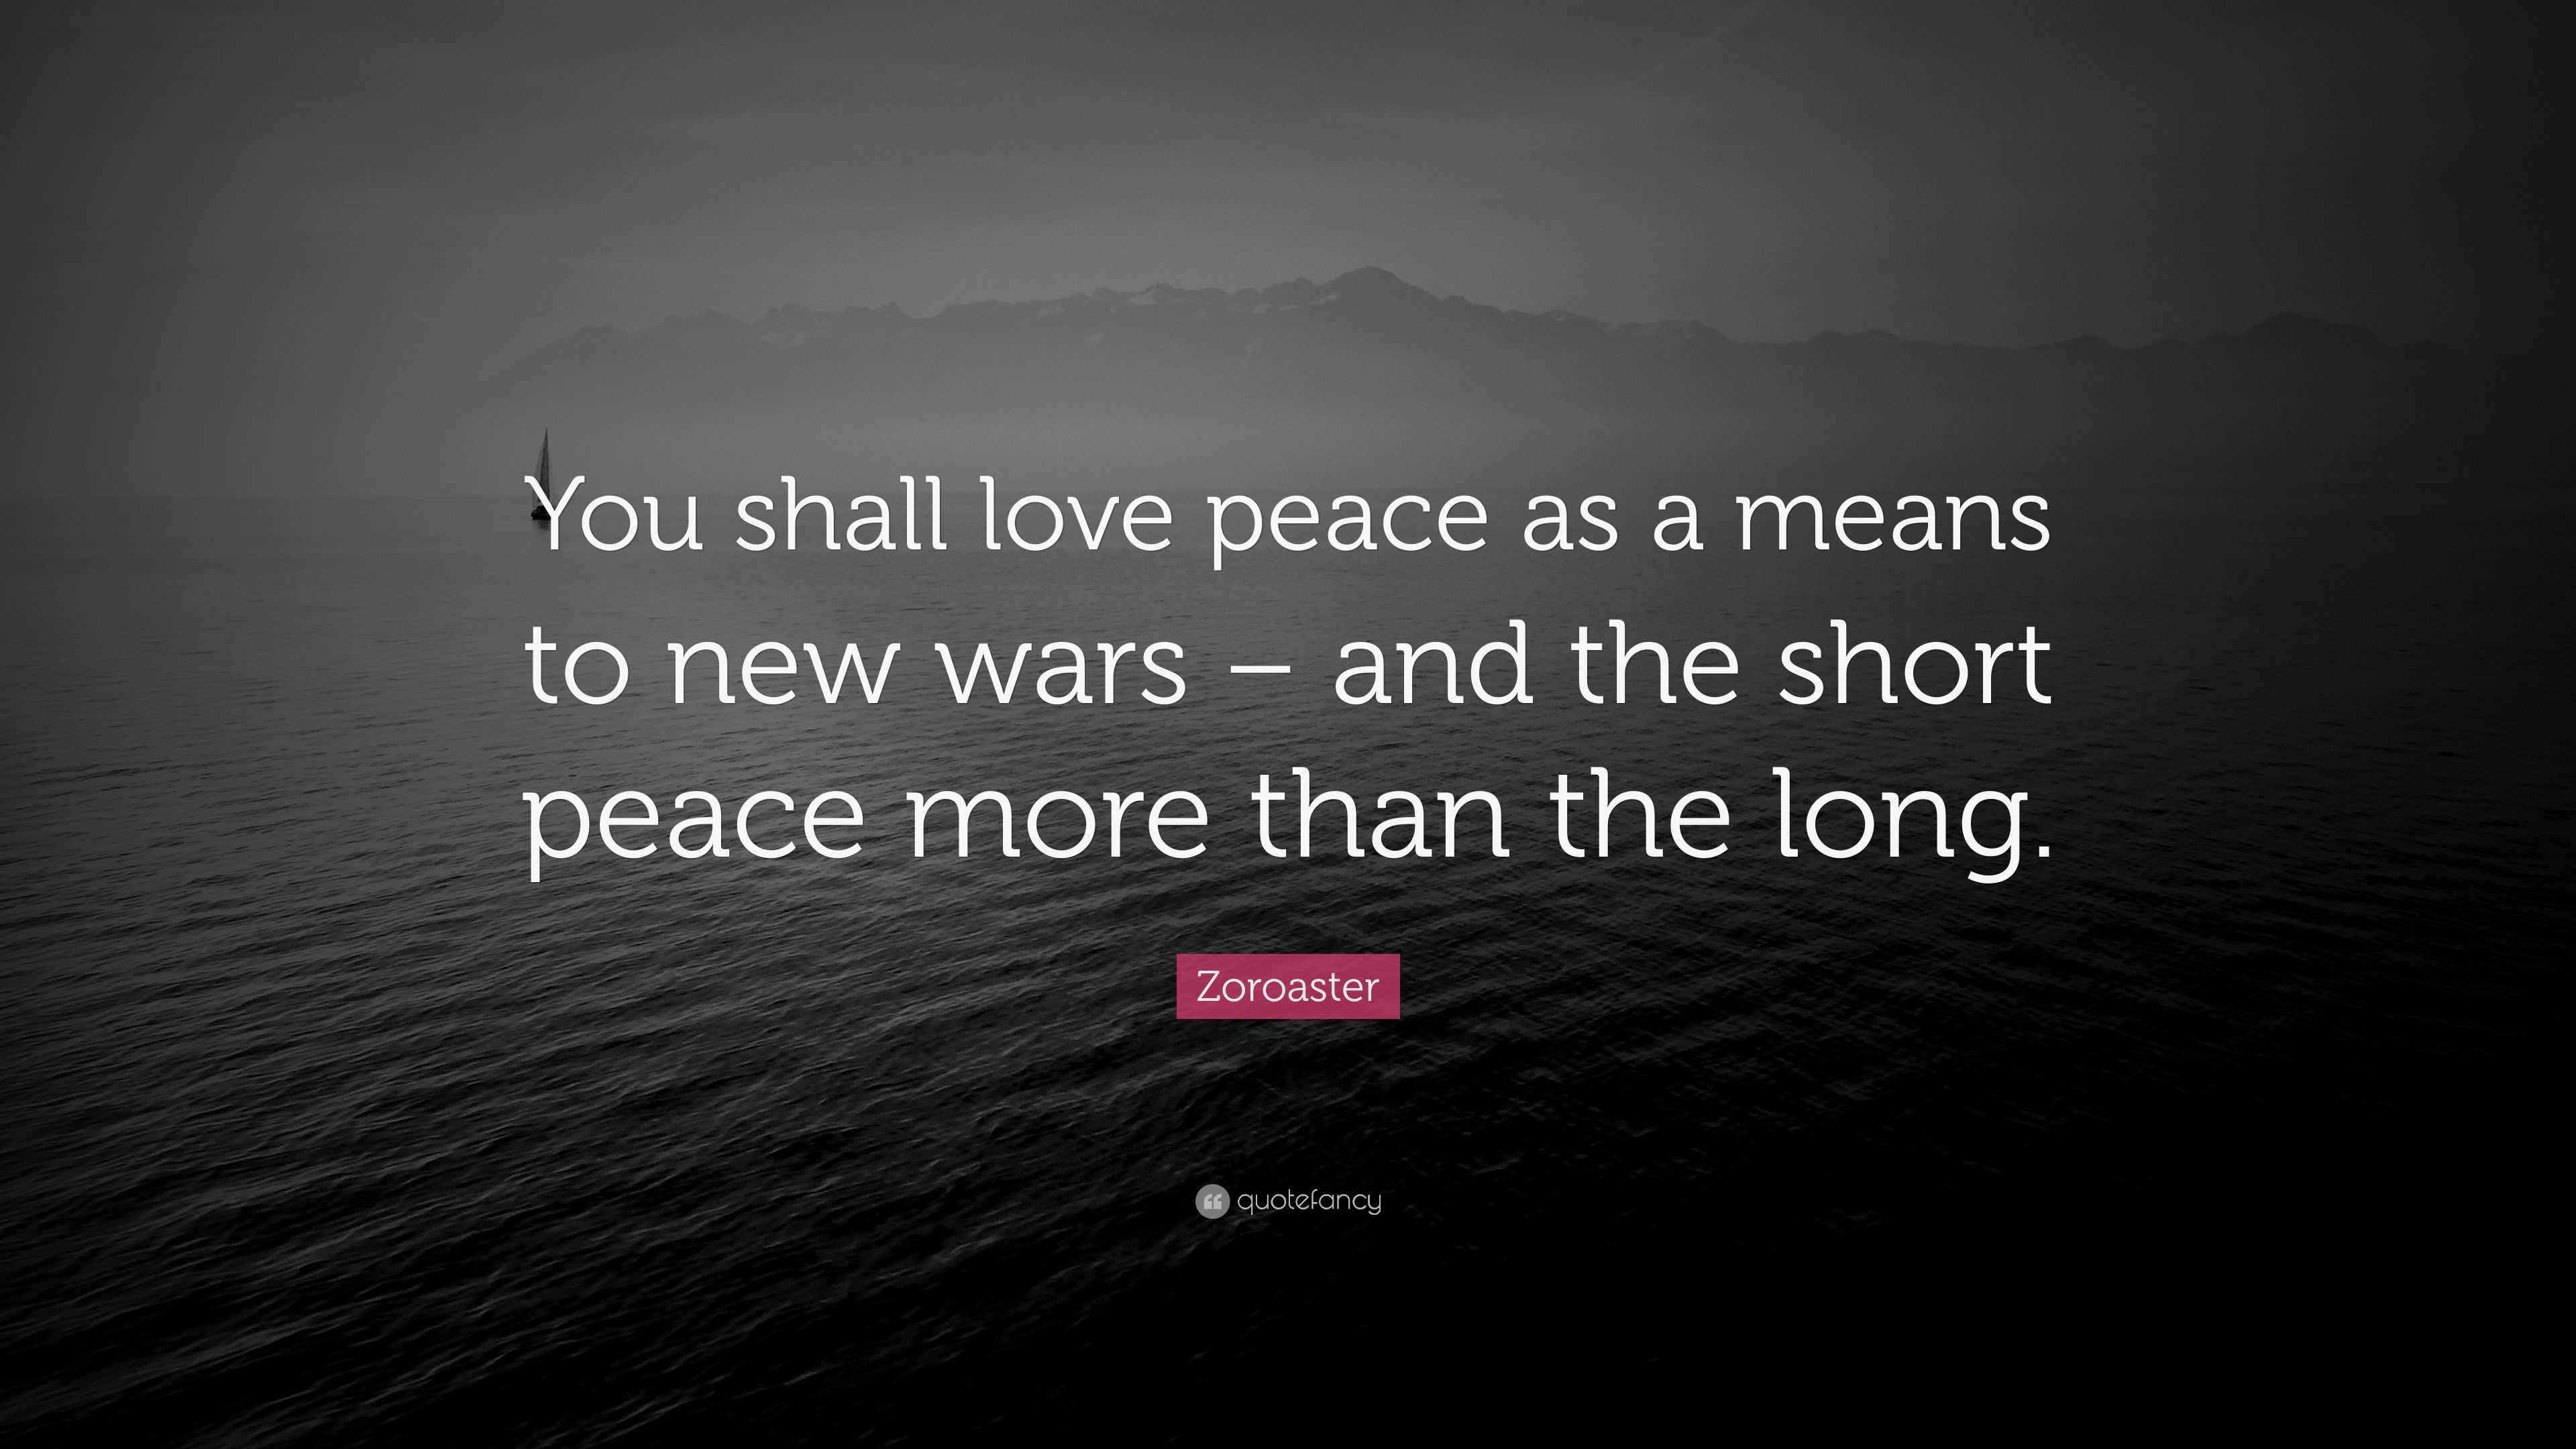 Zoroaster Quote: “You shall love peace as a means to new wars – and the ...